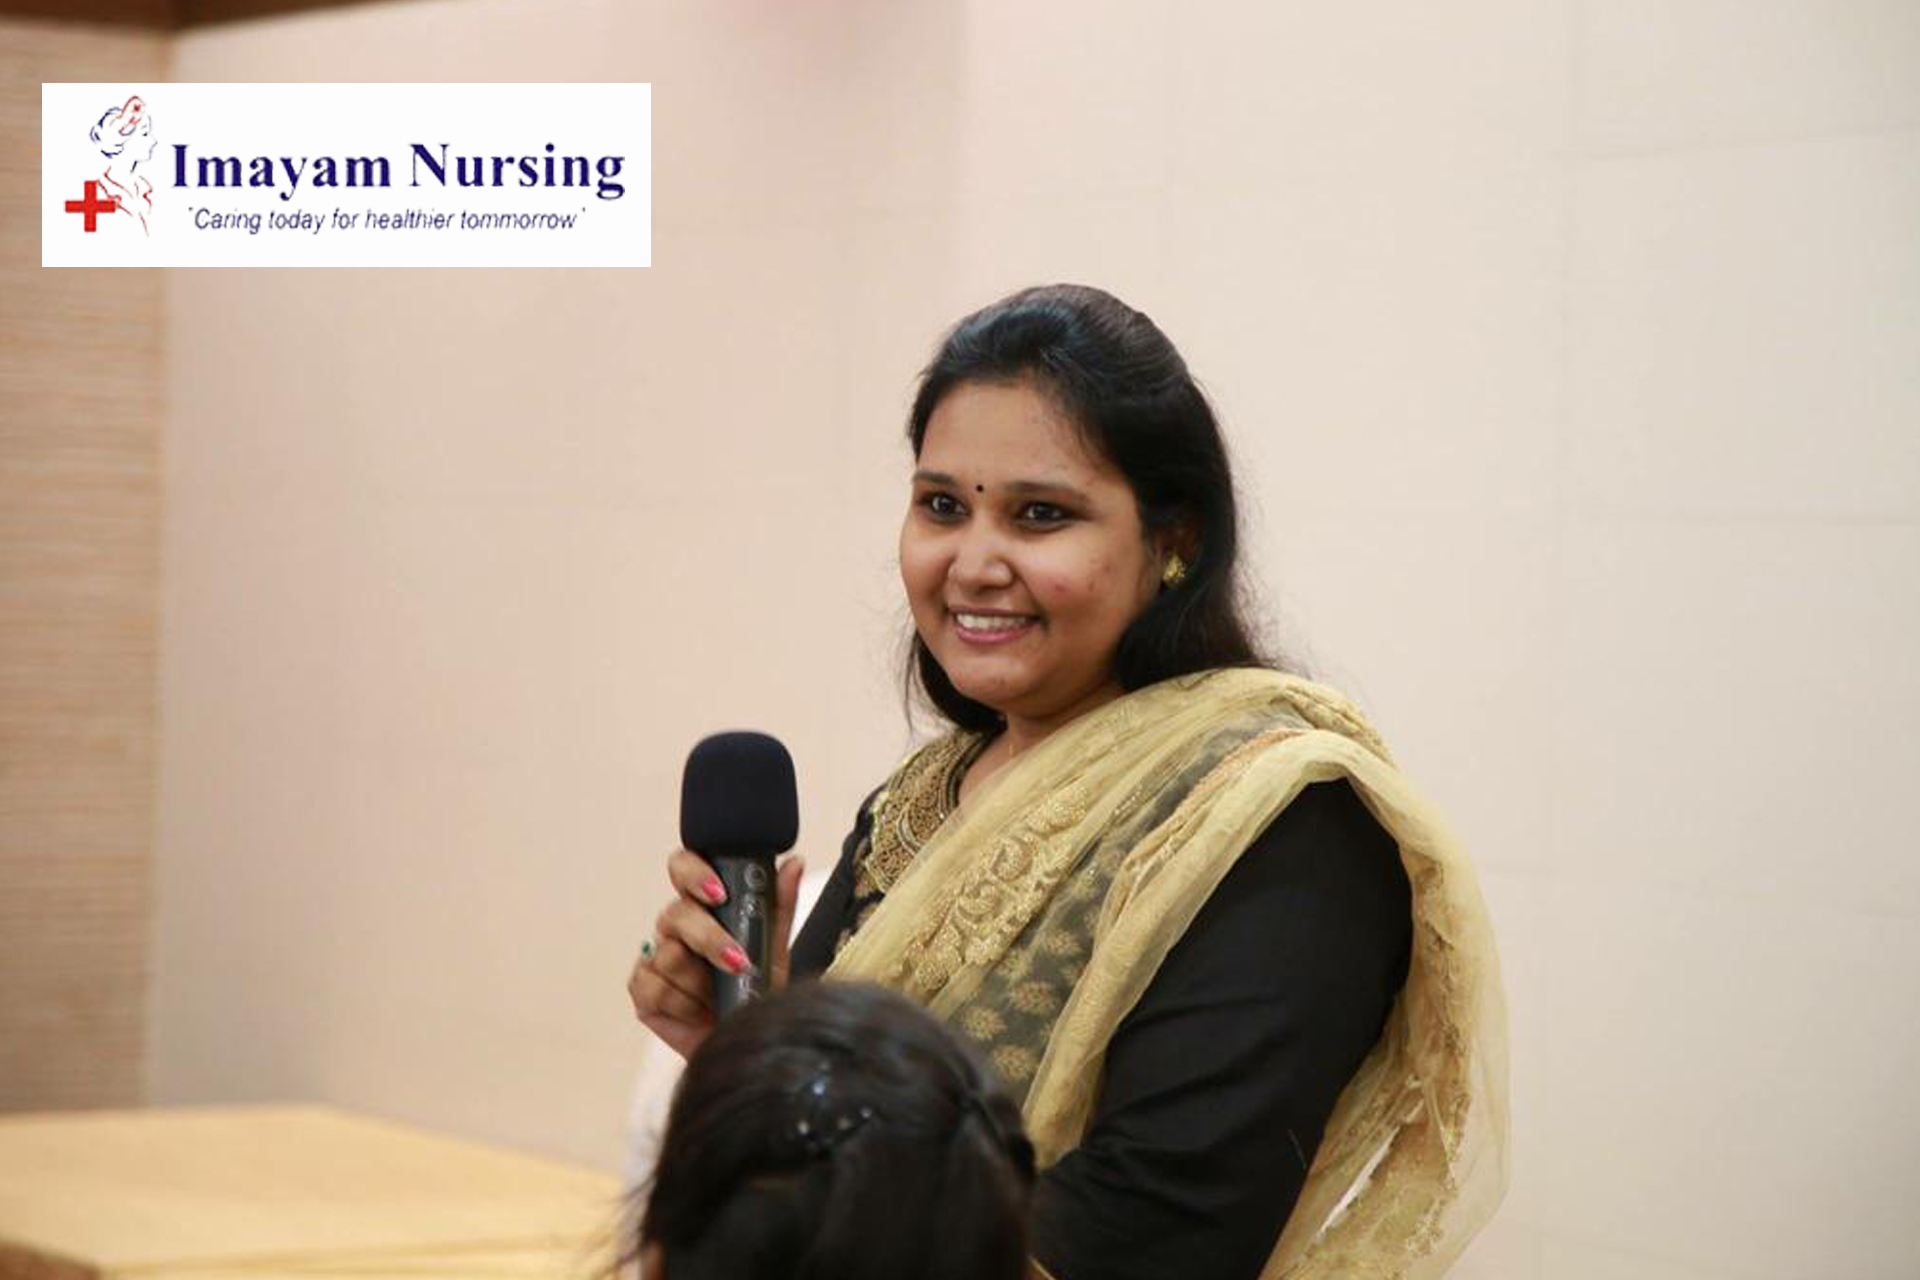 Home Nursing Care Services in Chennai, Patient Care Services in Koyambedu